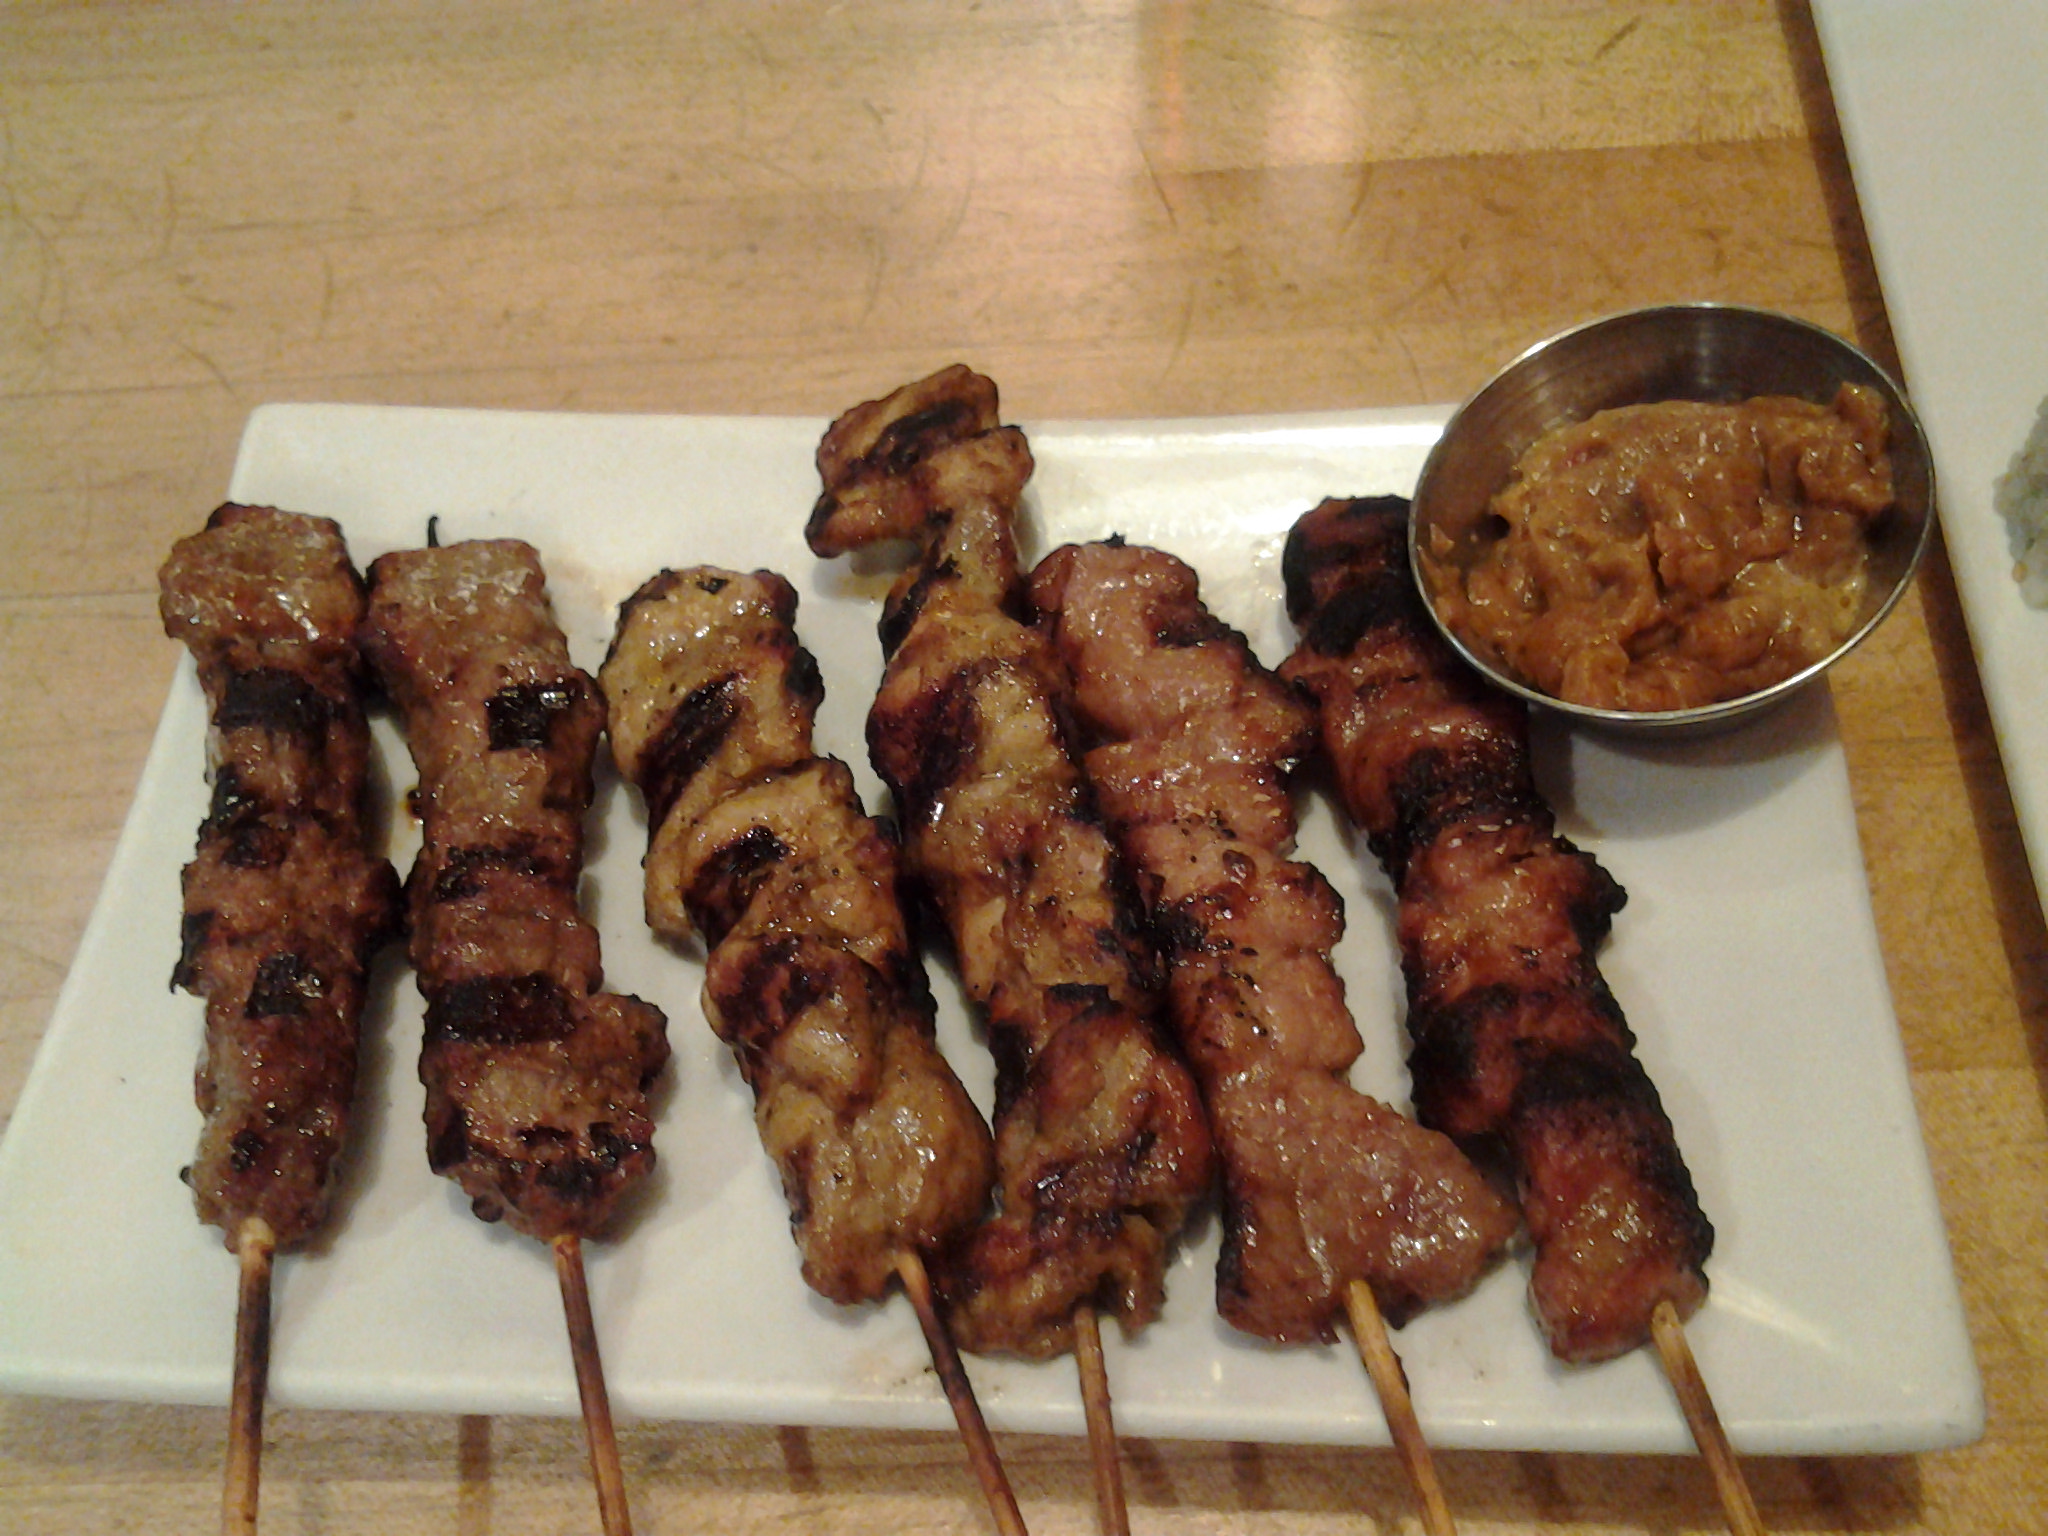 several shishkabe skewered to one another on a white plate